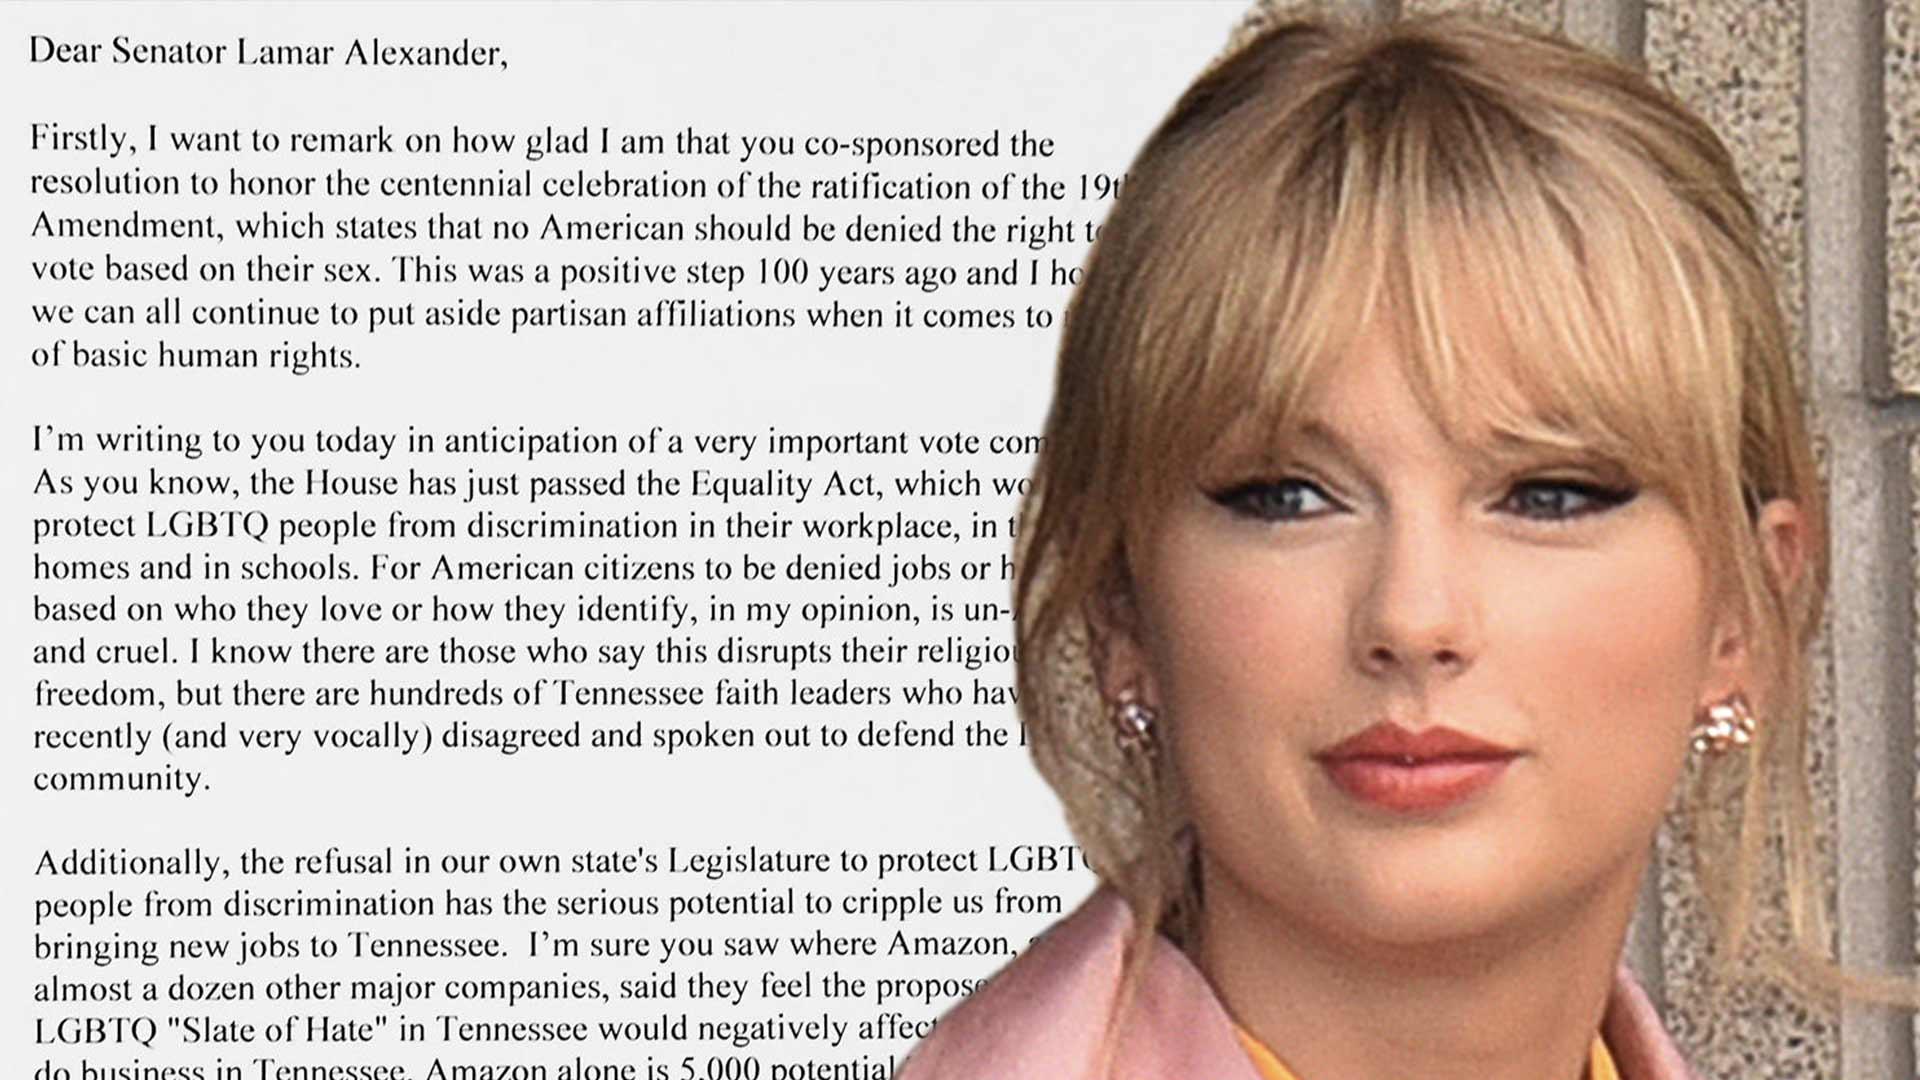 Taylor Swift Pleads With Tennessee Senator to Support Equality Act in Open Letter